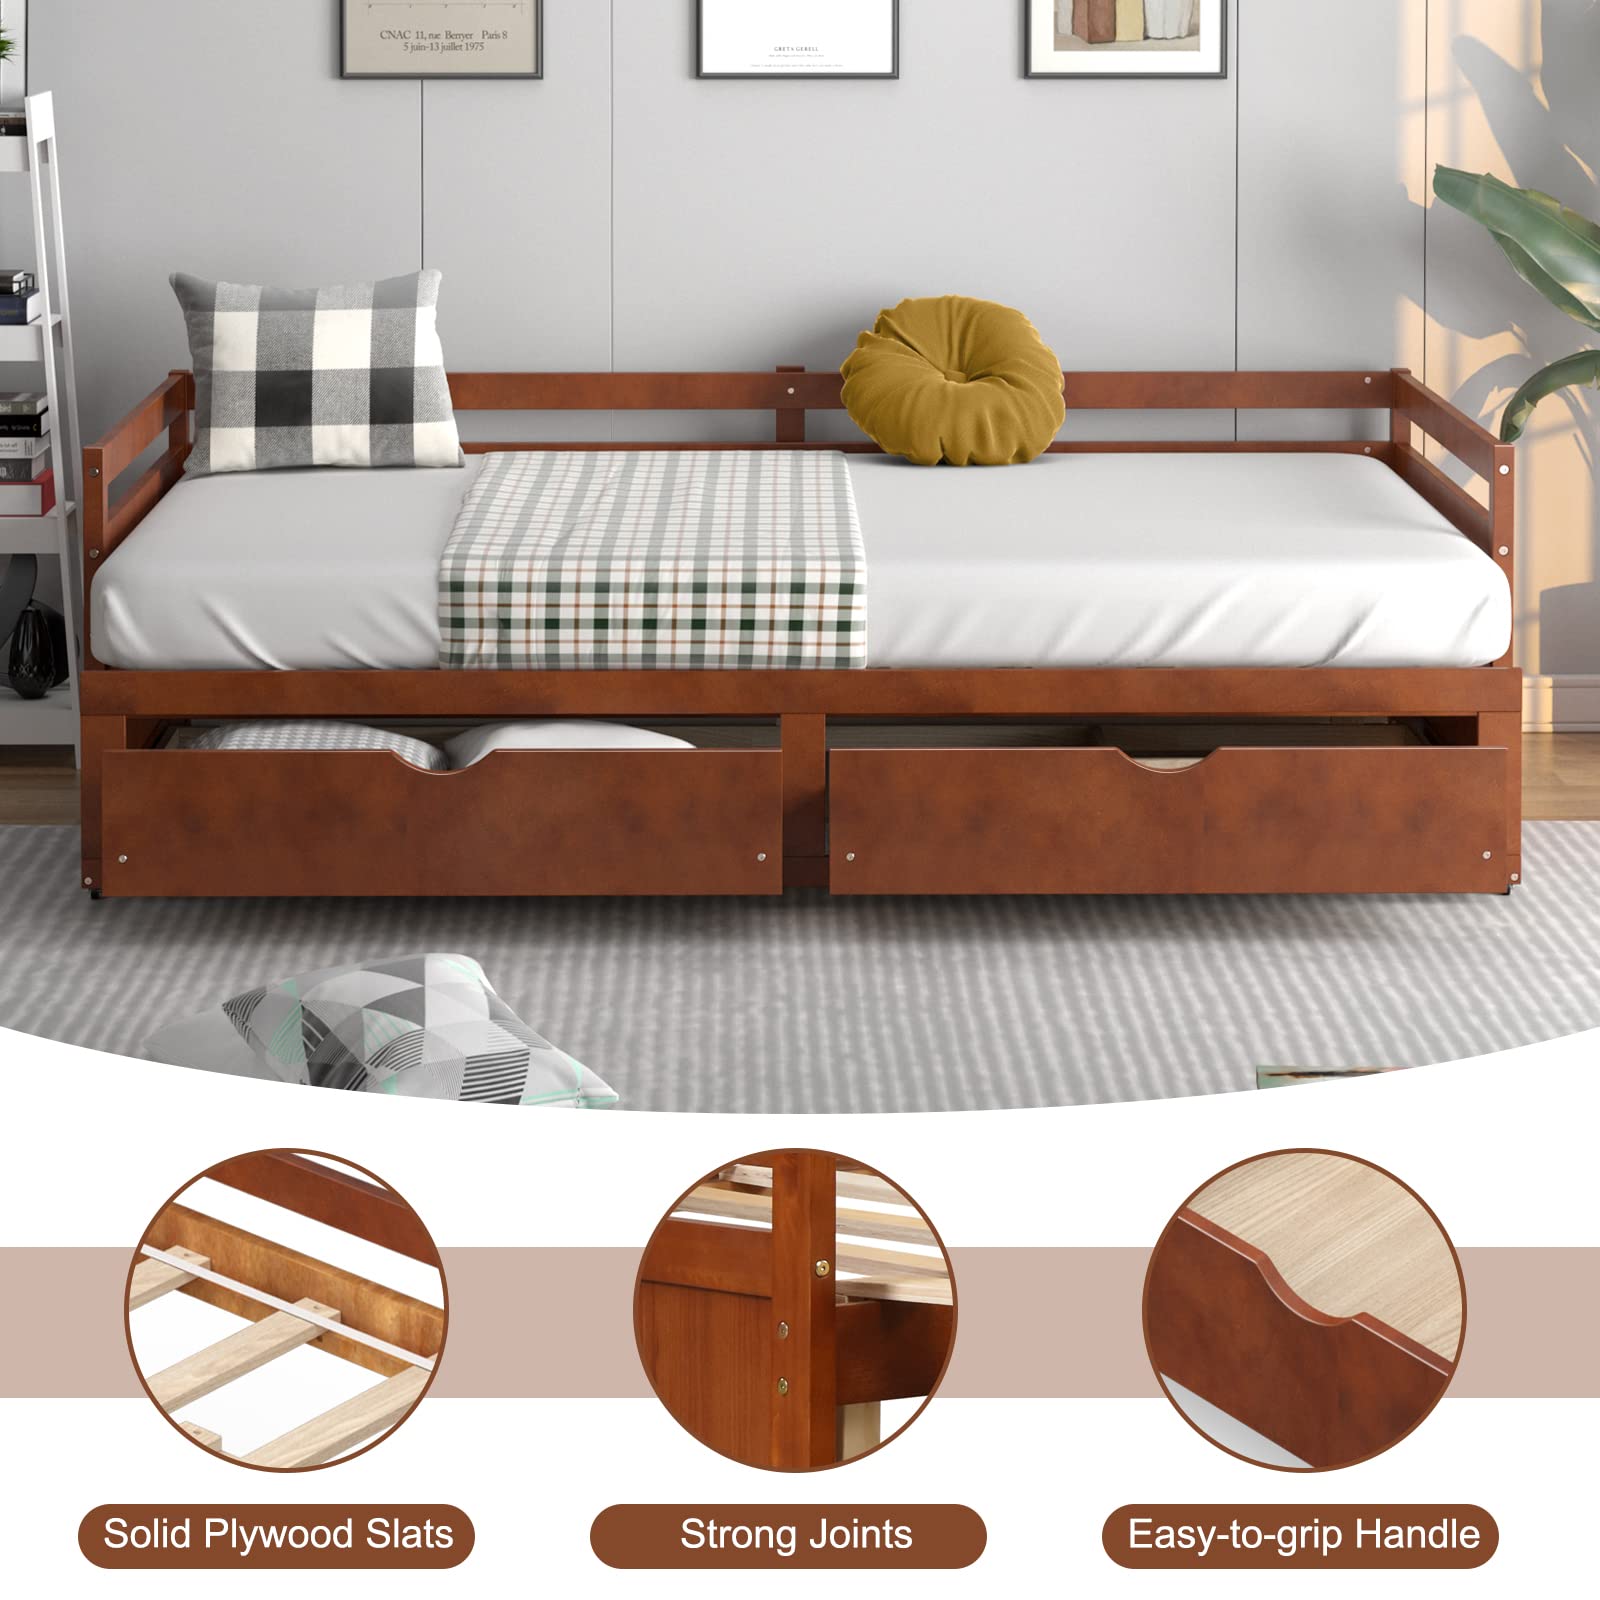 Giantex Extendable Daybed